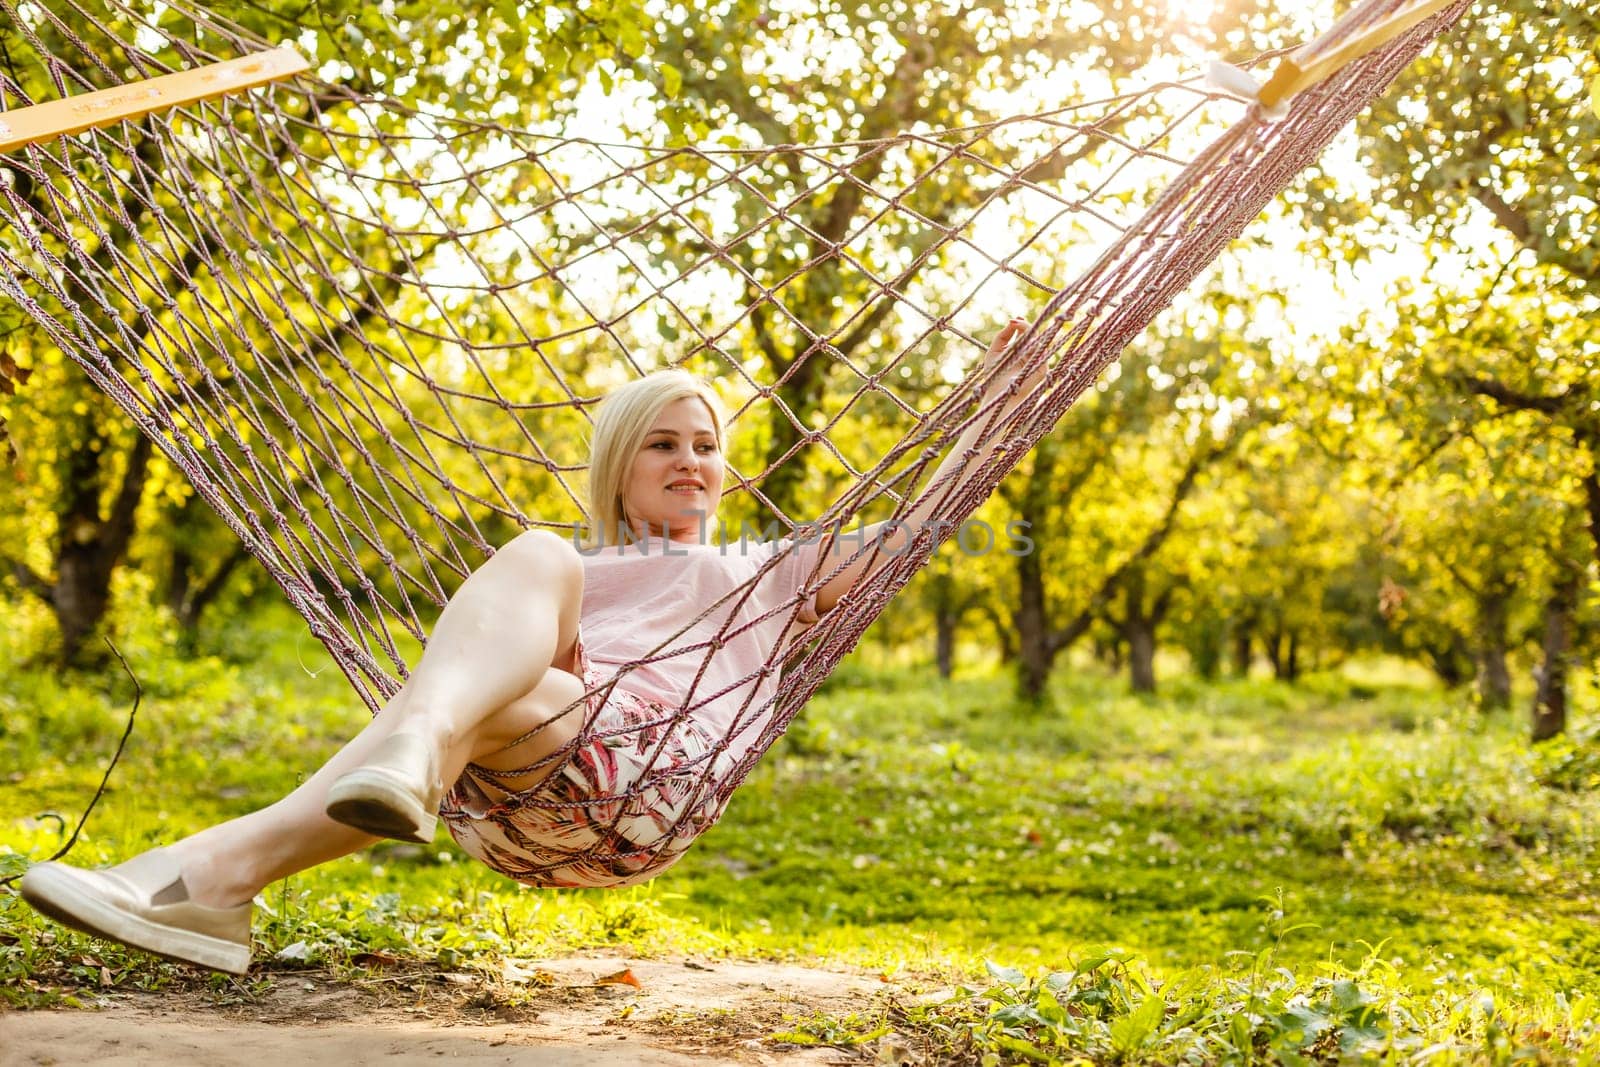 attractive woman 30 years old in a hammock. Outdoor.